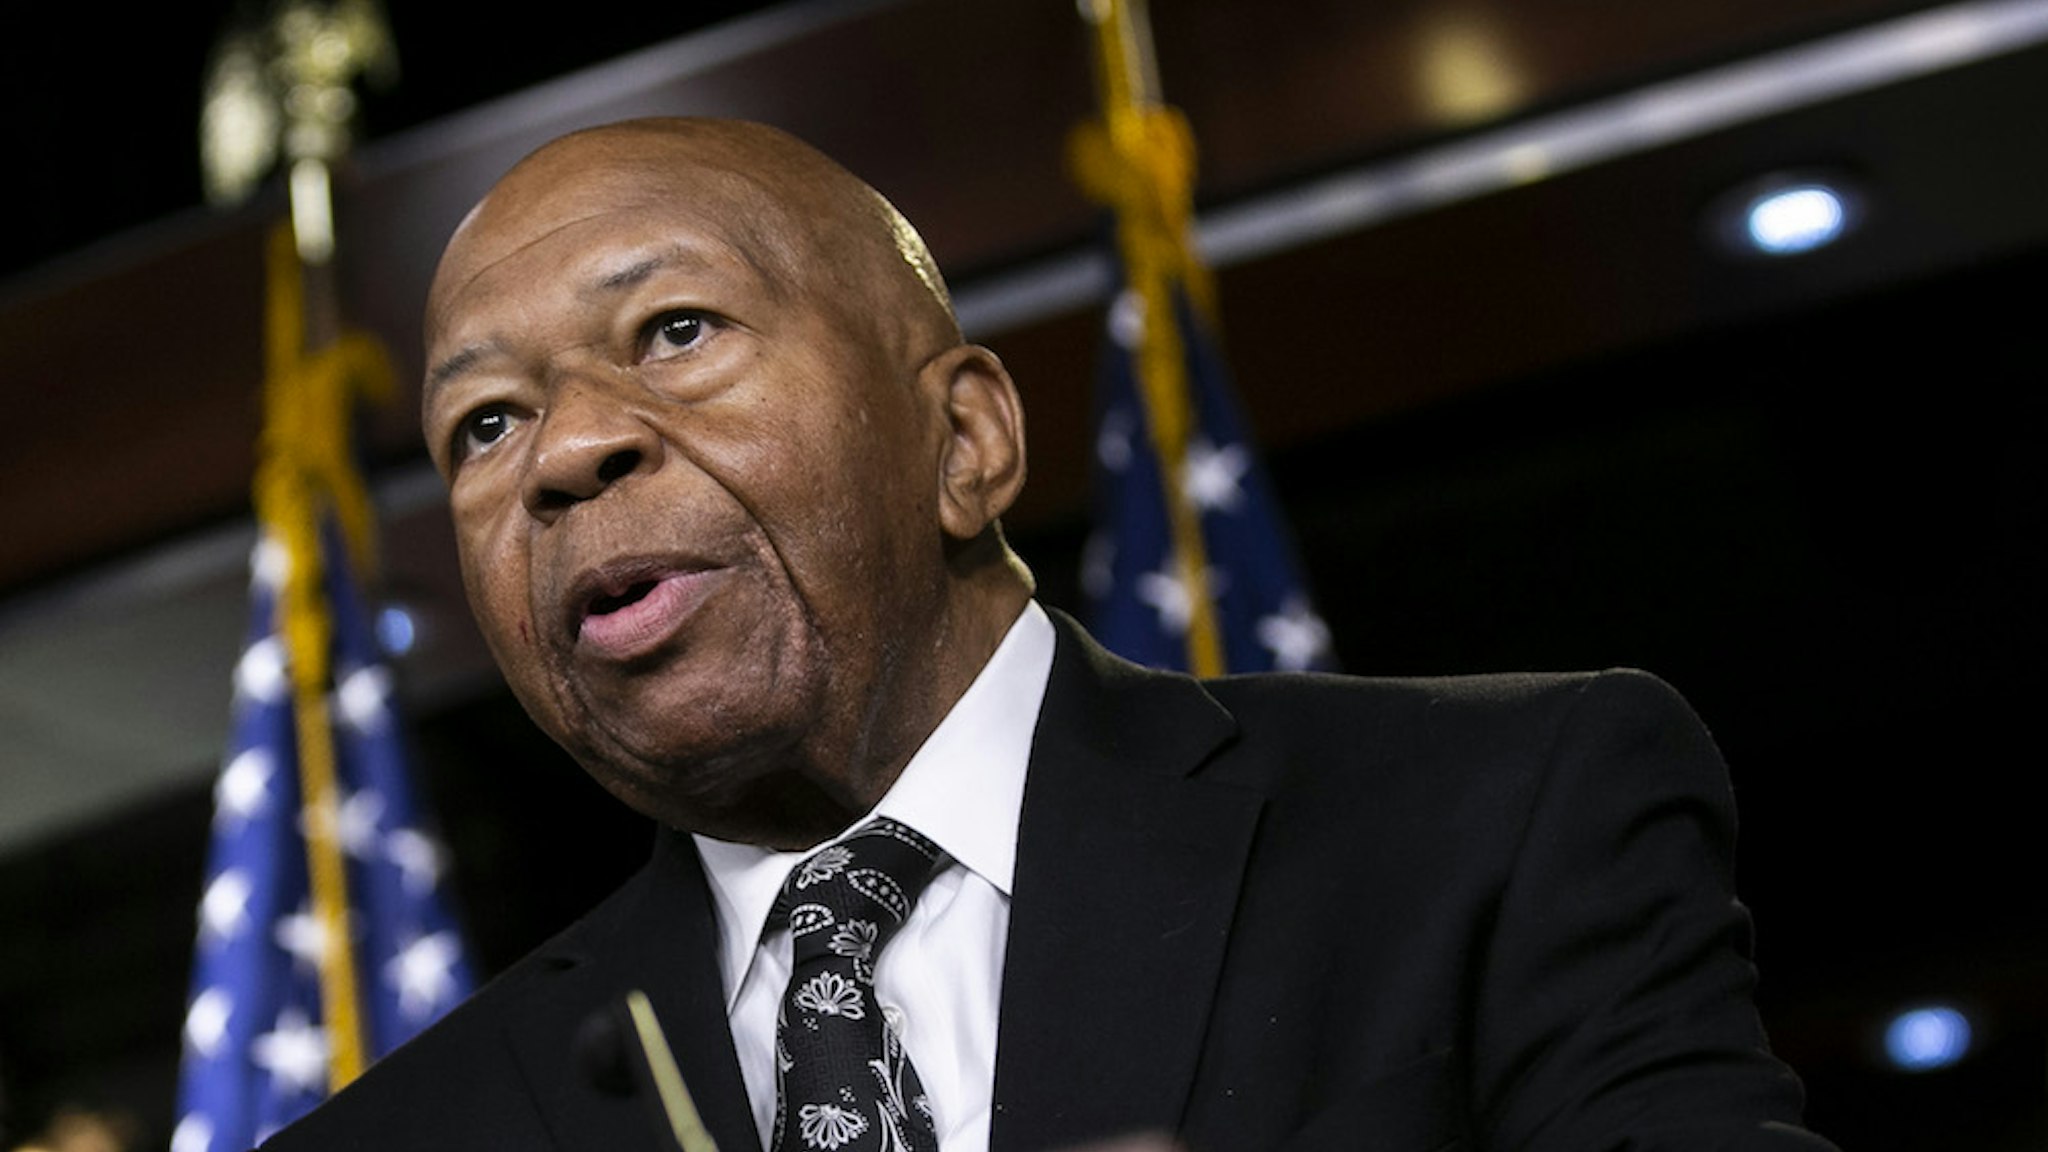 Representative Elijah Cummings, a Democrat from Maryland and chairman of the House Oversight Committee, speaks during a news conference on Capitol Hill in Washington, D.C., U.S., on Tuesday, June 11, 2019. The House voted to authorize lawsuits against Attorney General William Barr and former White House Counsel Don McGahn as Democrats try to enforce subpoenas for documents and testimony in its investigations into President Donald Trump and his administration. Photographer: Al Drago/Bloomberg